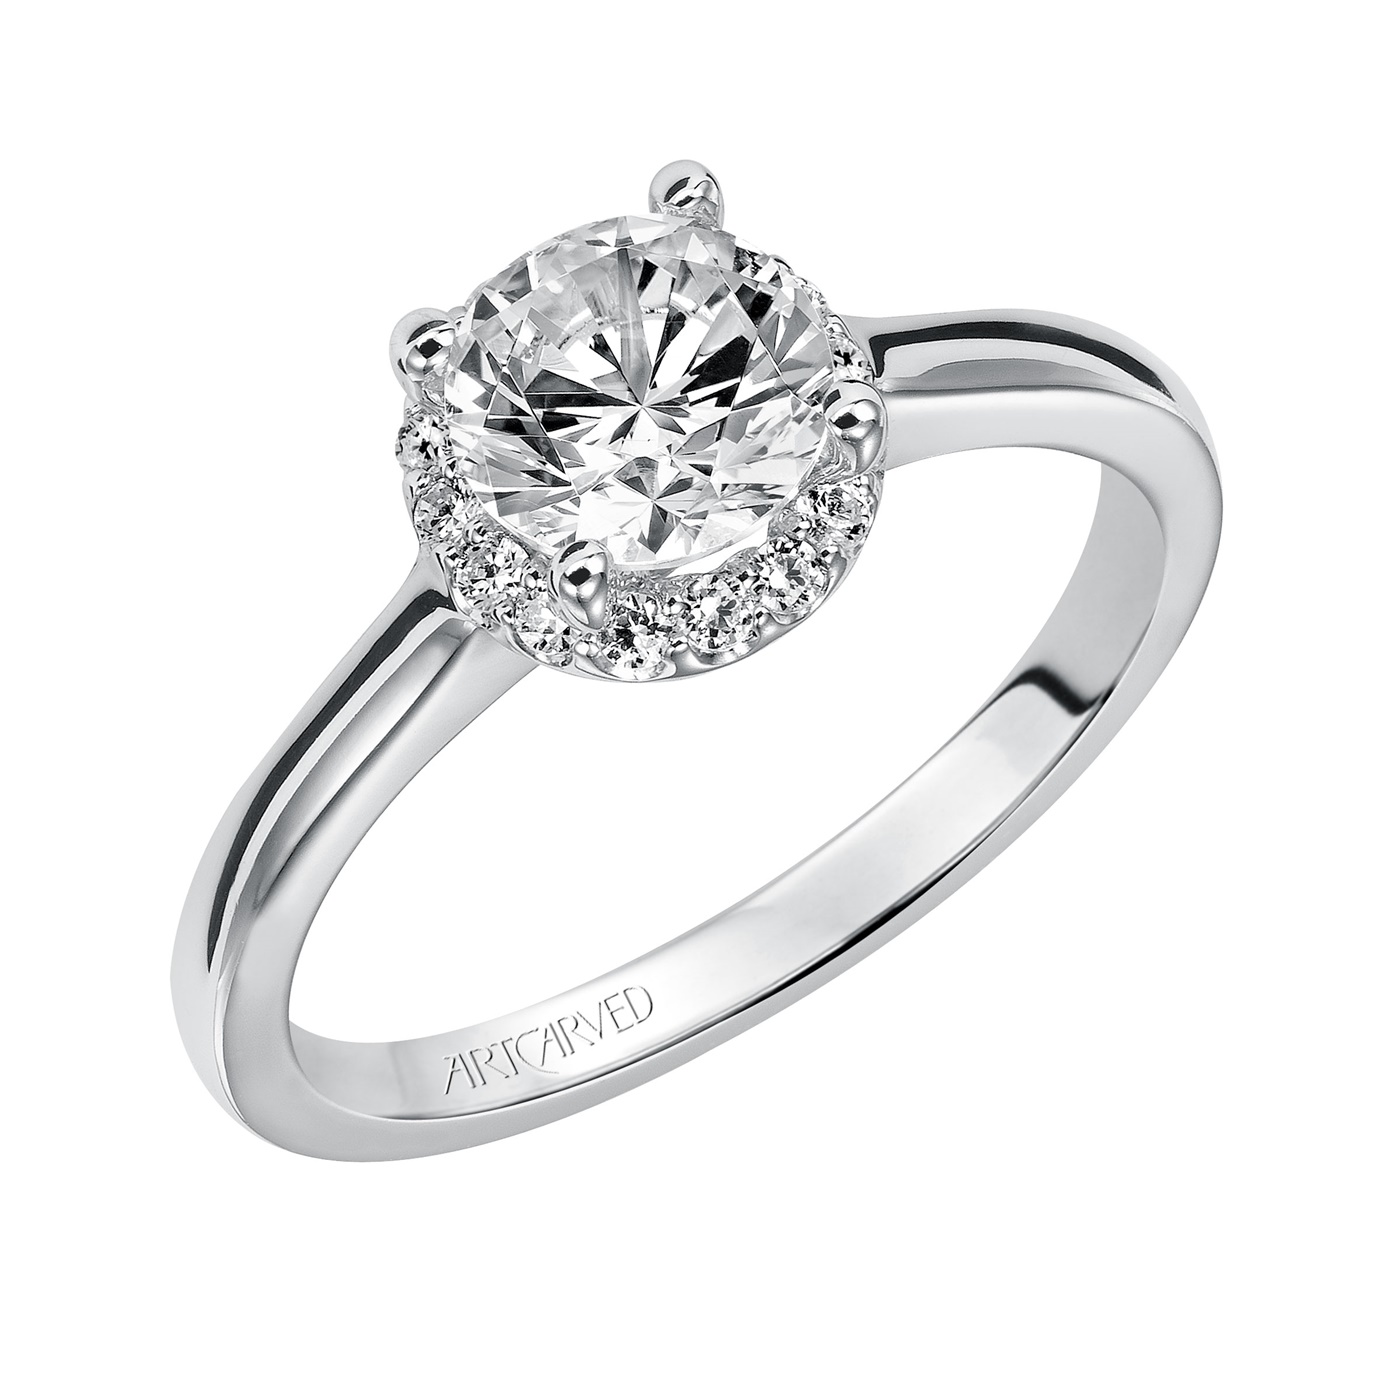 14kt White Gold and Diamond Halo Engagement Ring by ArtCarved